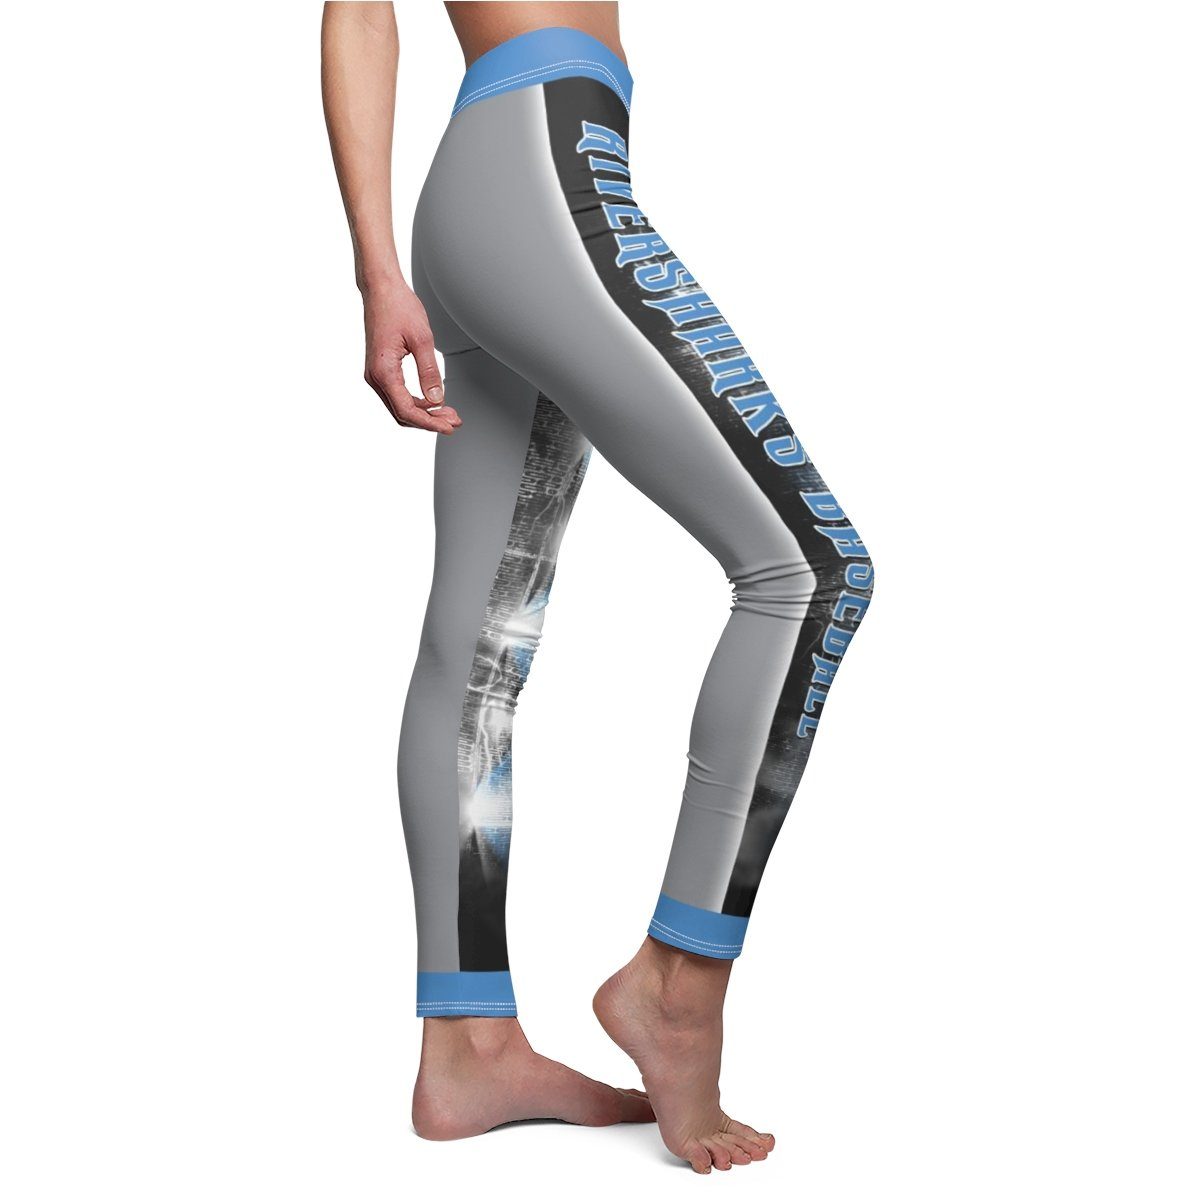 Spark - V.5 - Extreme Sportswear Cut & Sew Leggings Template-Photoshop Template - Photo Solutions